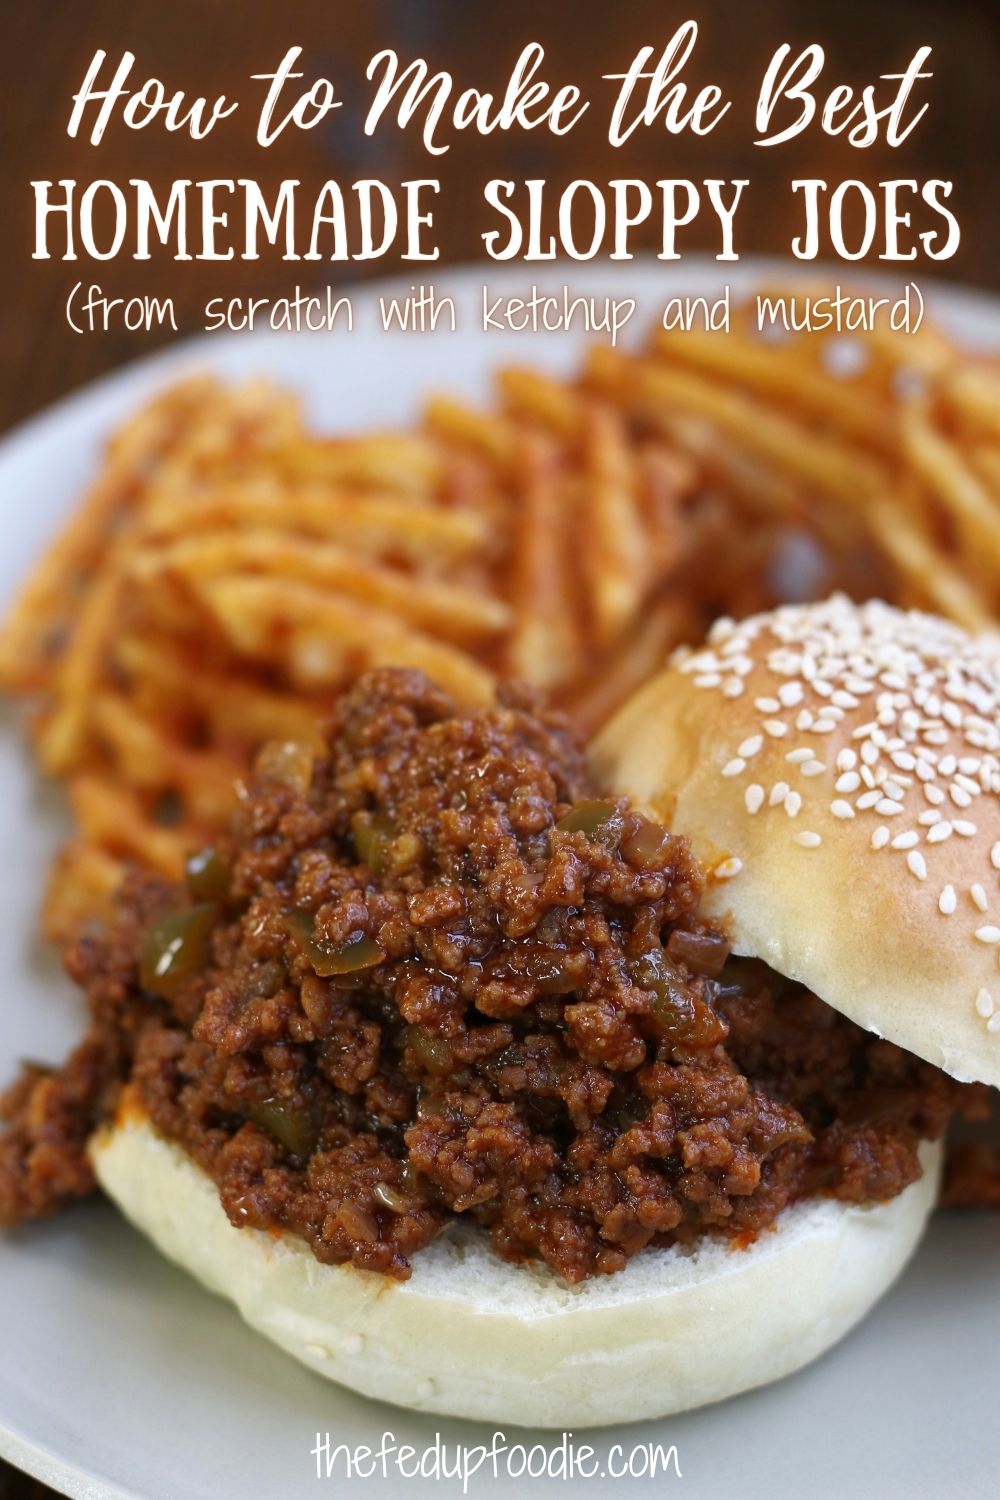 Family friendly Homemade Sloppy Joes have the perfect balance of sweetness to tanginess and are extremely tasty and satisfying. With a thick from-scratch sauce made the old fashioned way, these sandwiches are perfect as an easy weeknight meal. 
#SloppyJoesWithKetchup #SloppyJoesWithBrownSugar #SloppyJoesWithDijonMustard #SloppyJoesWithOnionsAndPeppers #SloppyJoesWithTomatoPaste #SloppyJoesWithWorcestershireSauce #DIYSloppyJoes